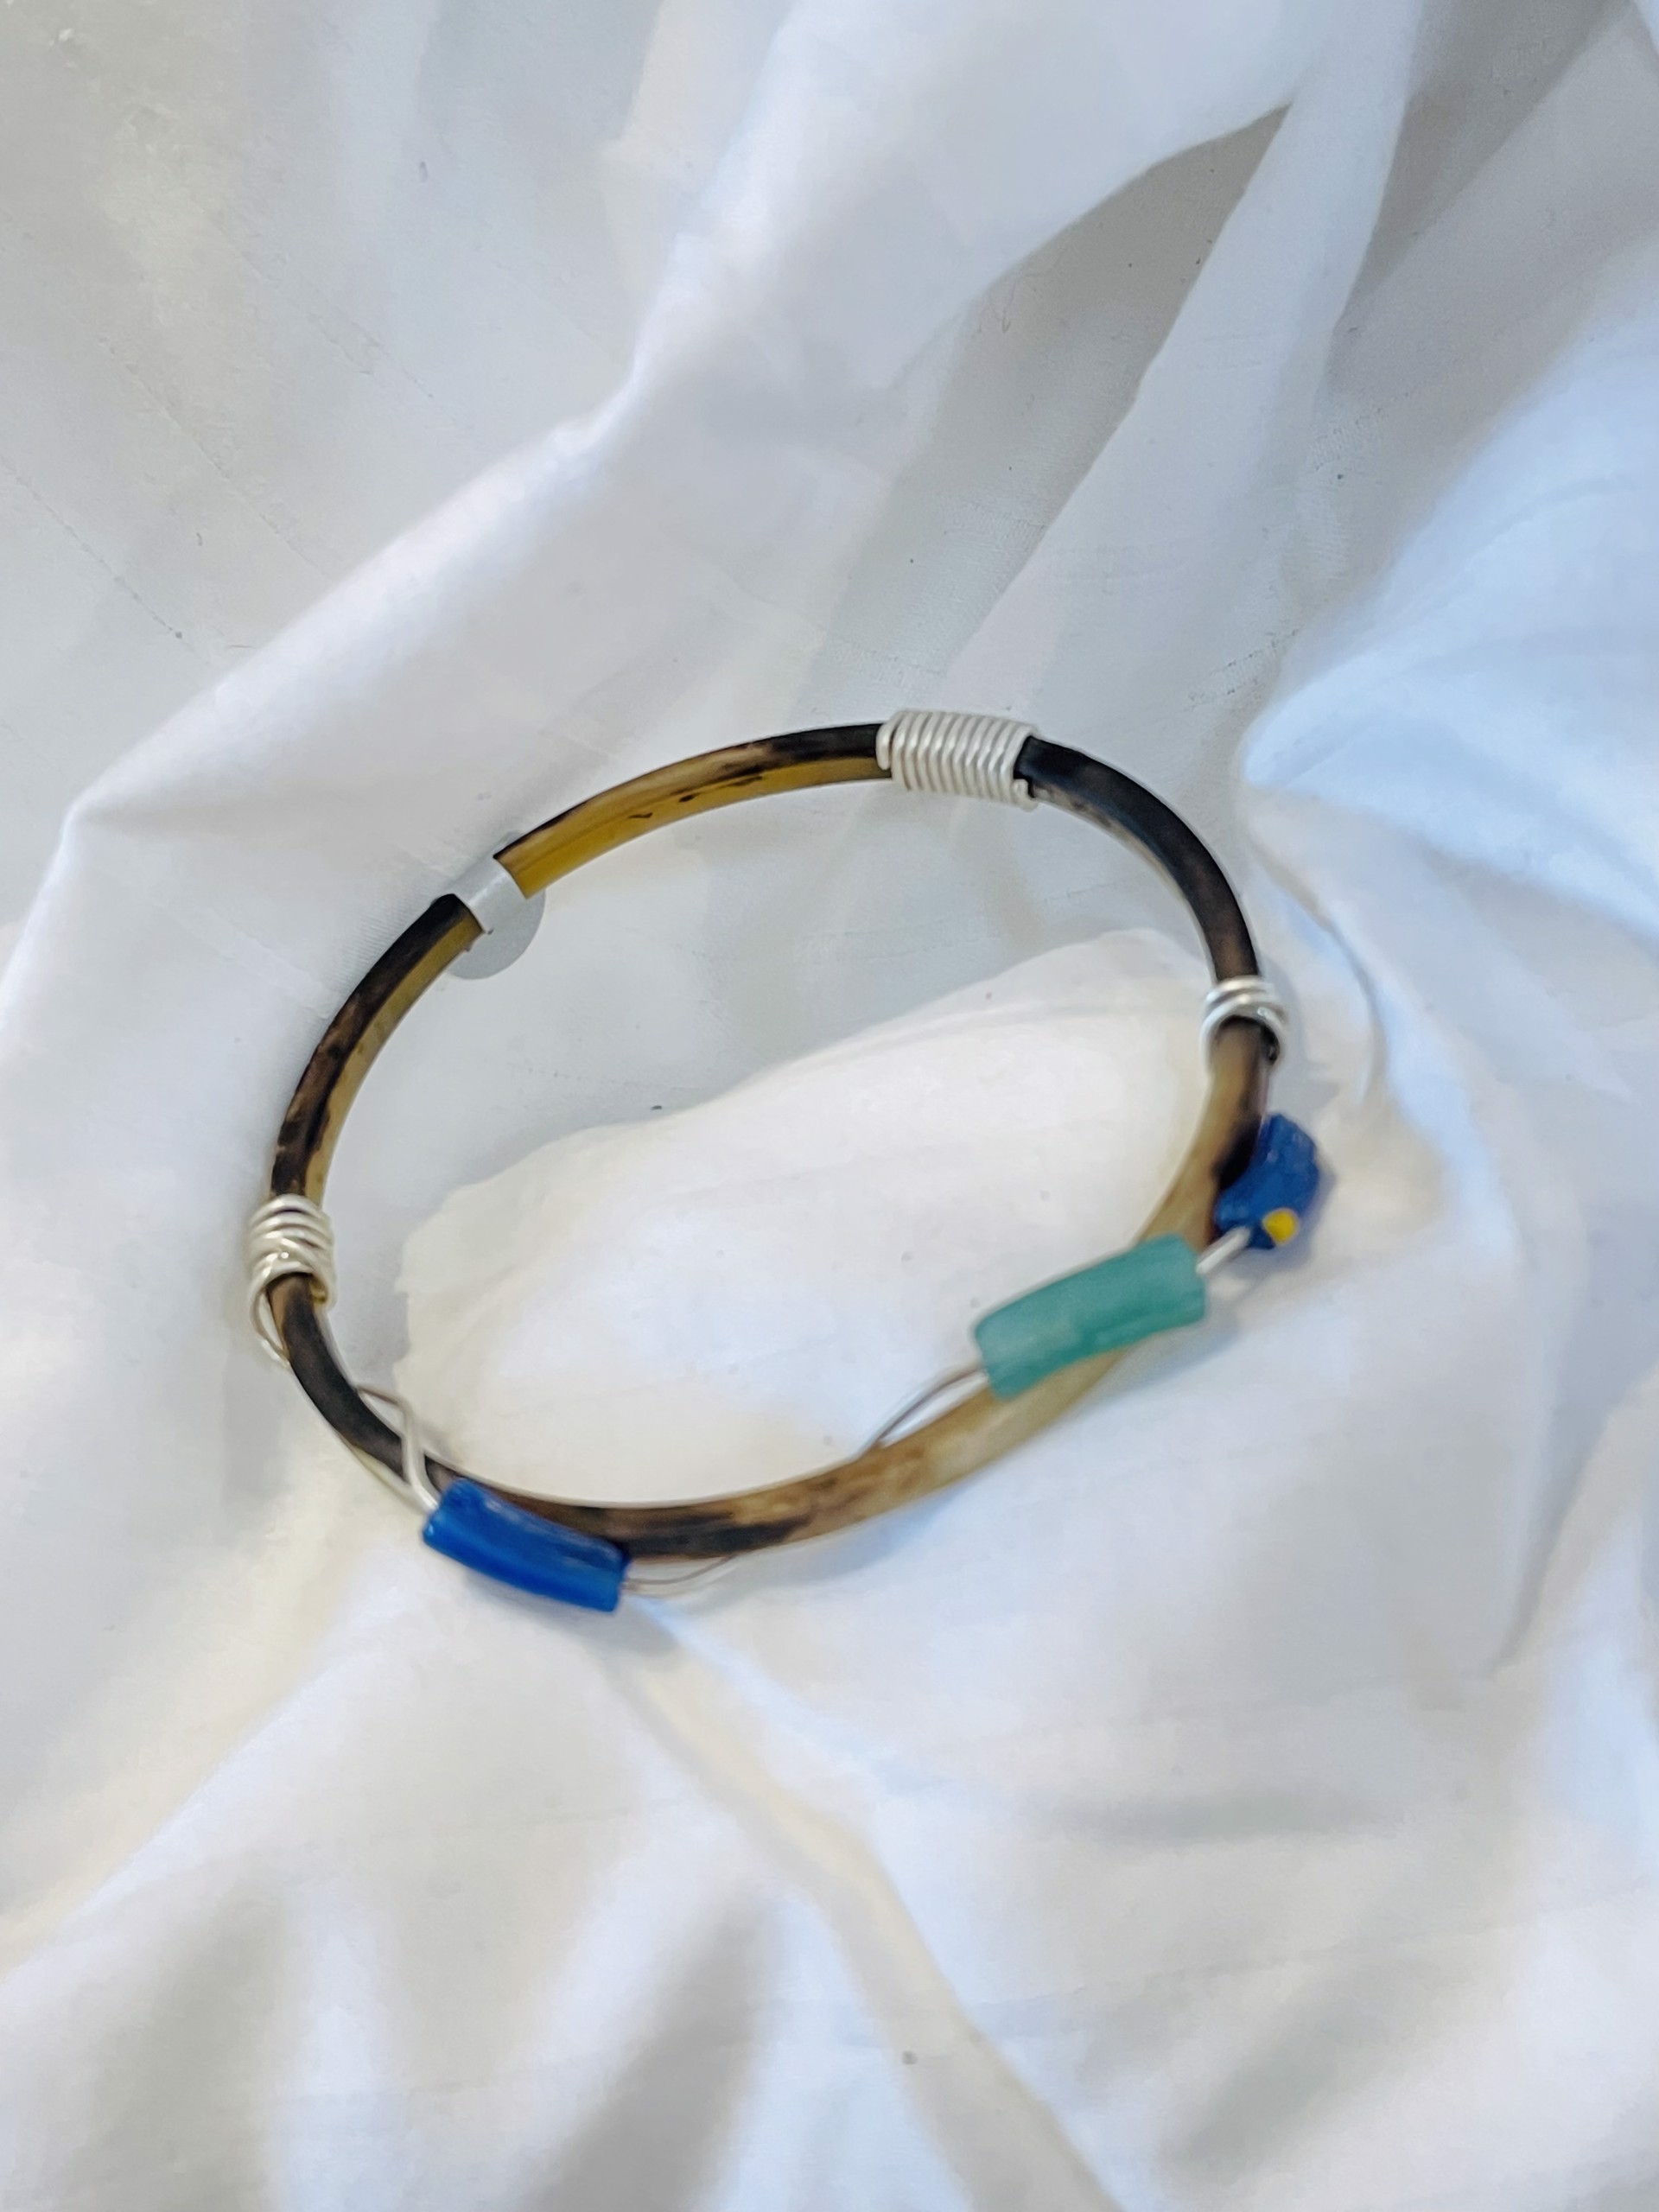 Bracelet - Tusk Horn Bangle With Roman Sea Glass Beads AC 261 by Annette Campbell